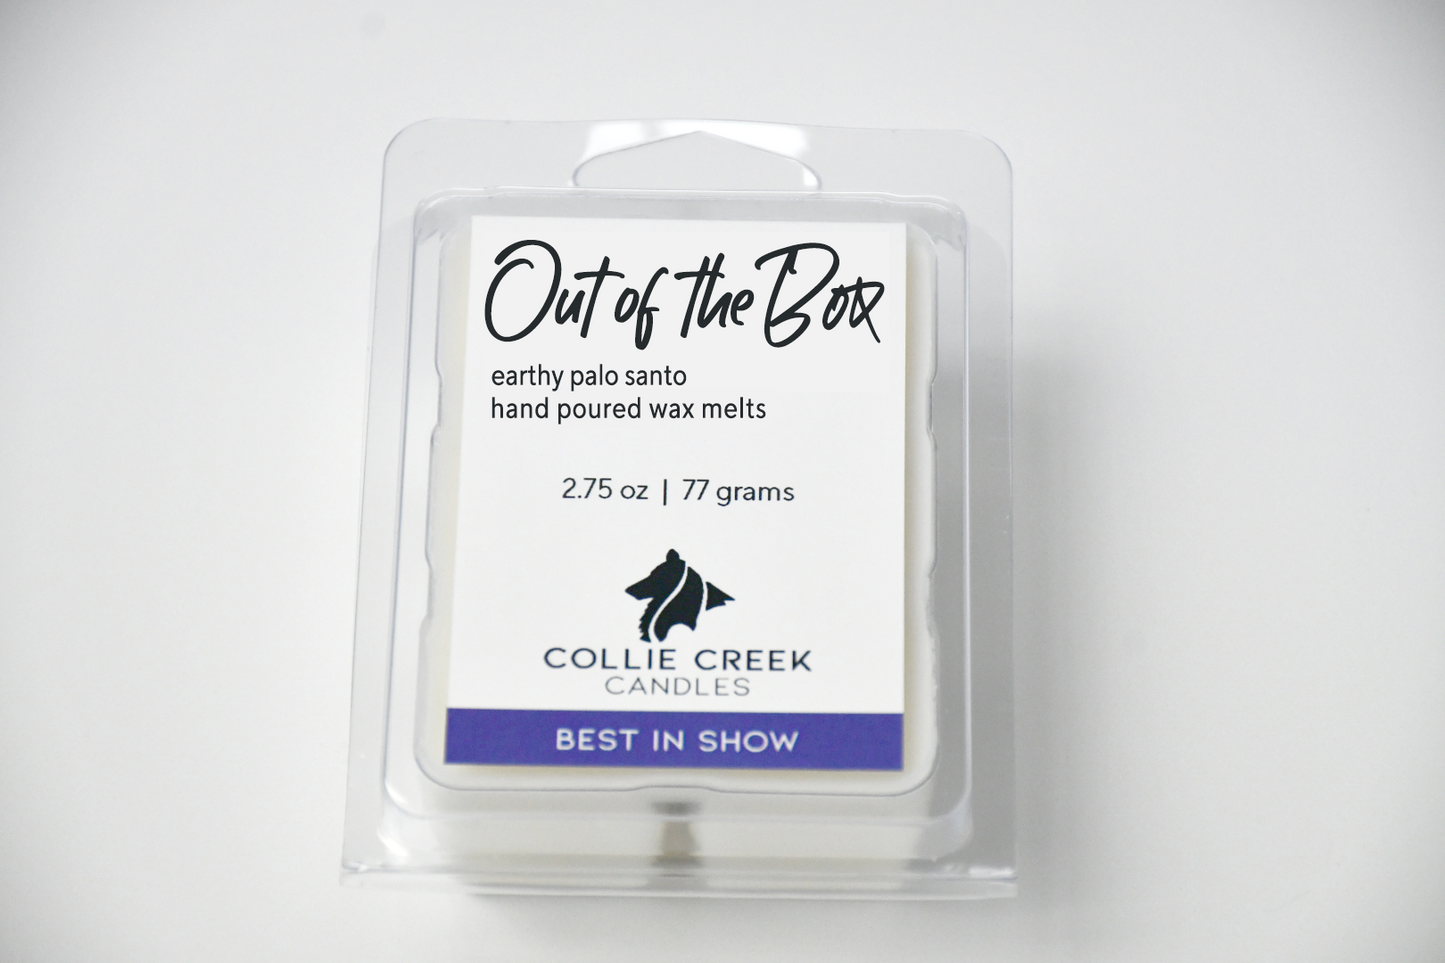 Out of the Box Wax Melt – Collie Creek Candles